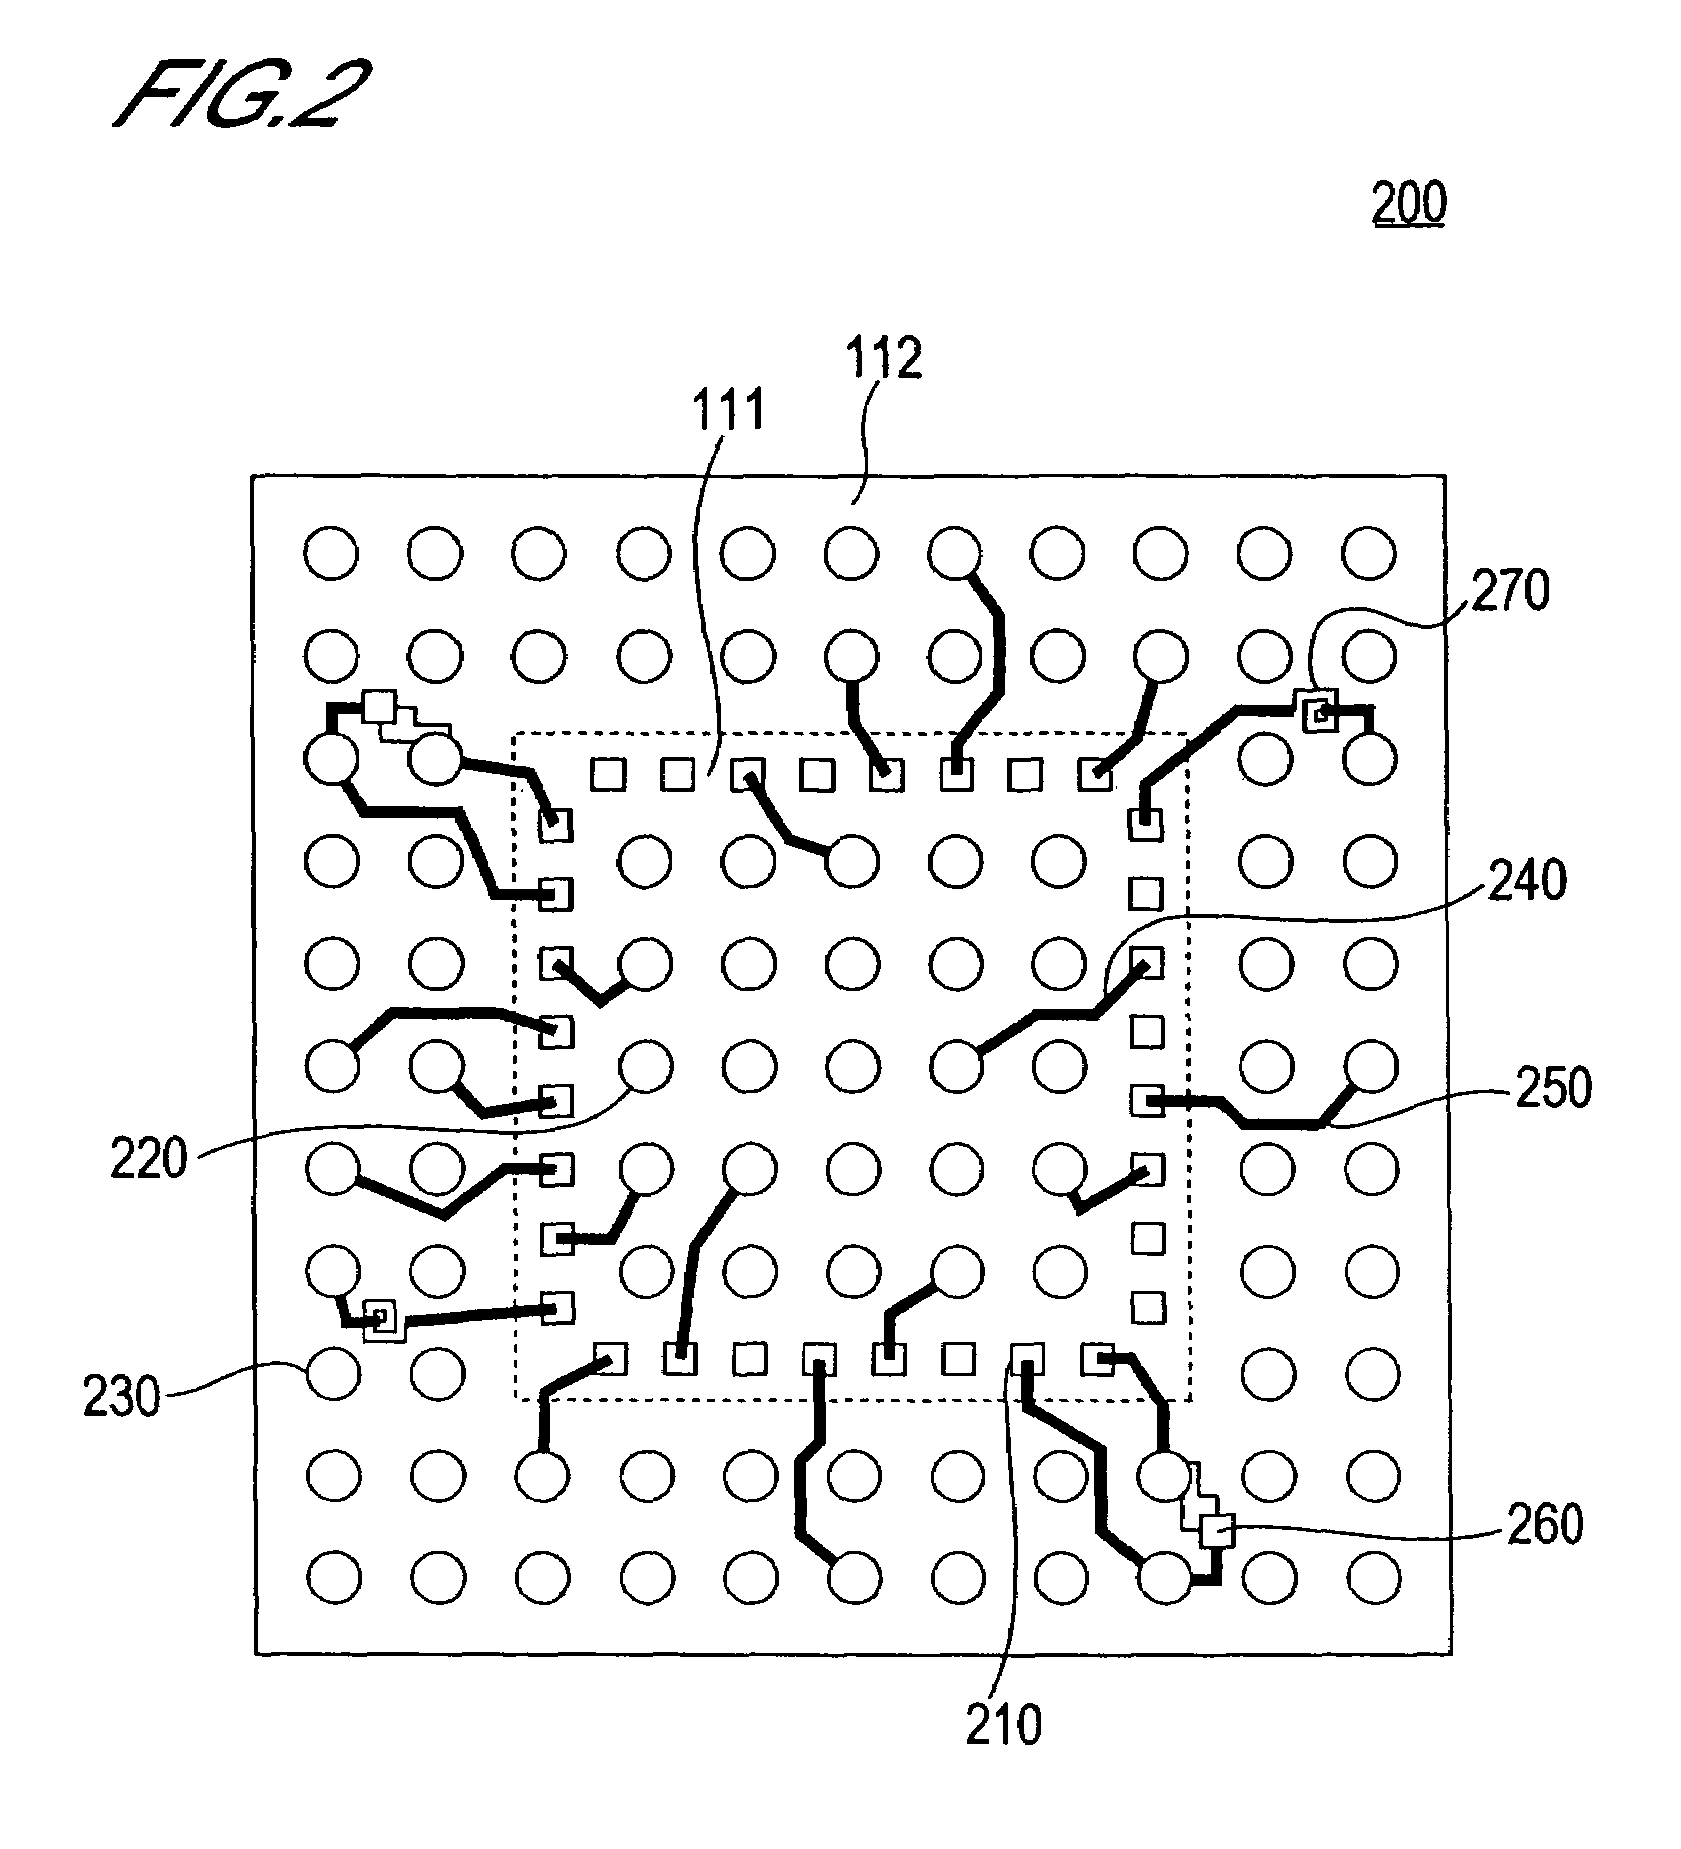 Semiconductor chip with passive element in a wiring region of the chip